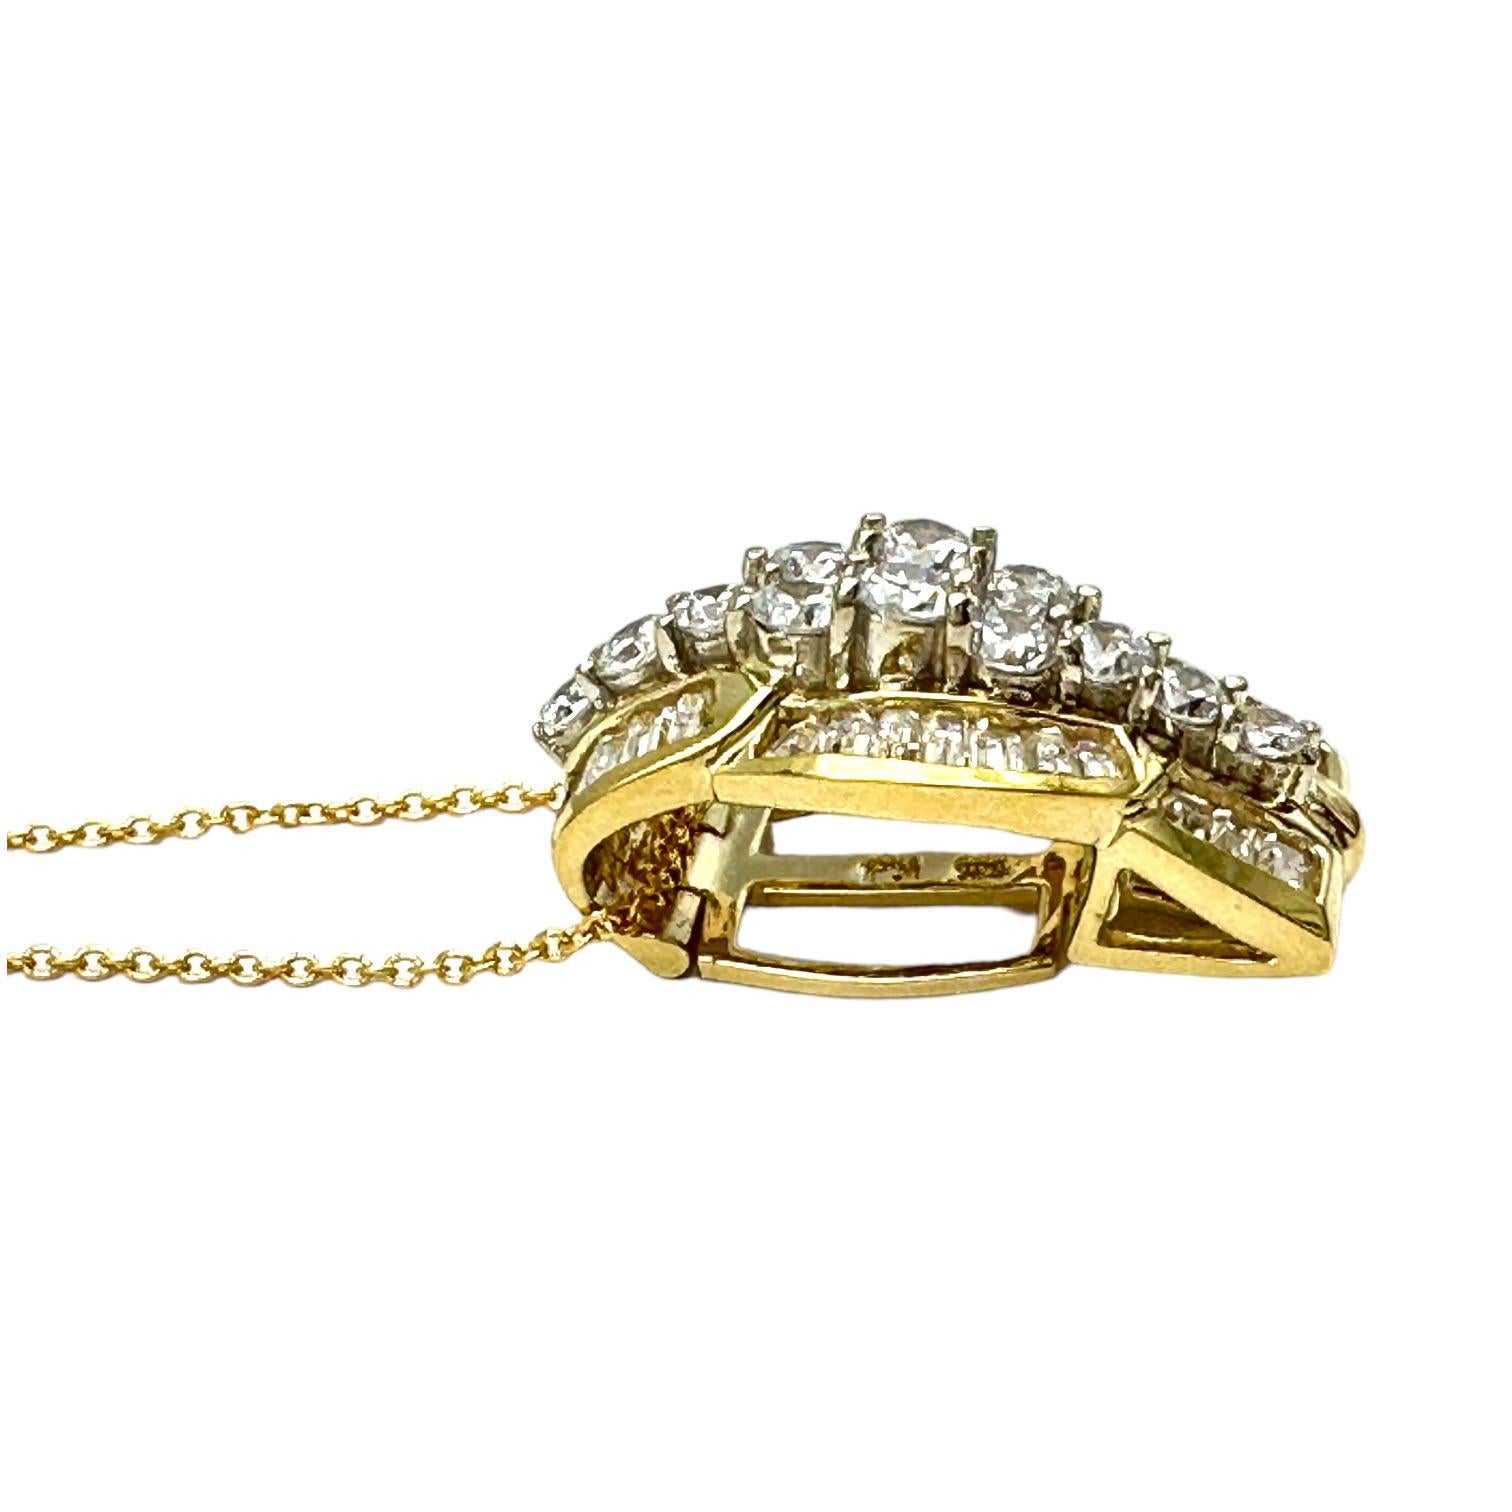 This 18-karat yellow gold diamond pendant-enhancer consists of round and baguette cut diamonds. The total weight of the pendant is 3.50 carats, and the quality is VS1-2 clarity and G color. The length of the pendant is 1.00 and can be used to